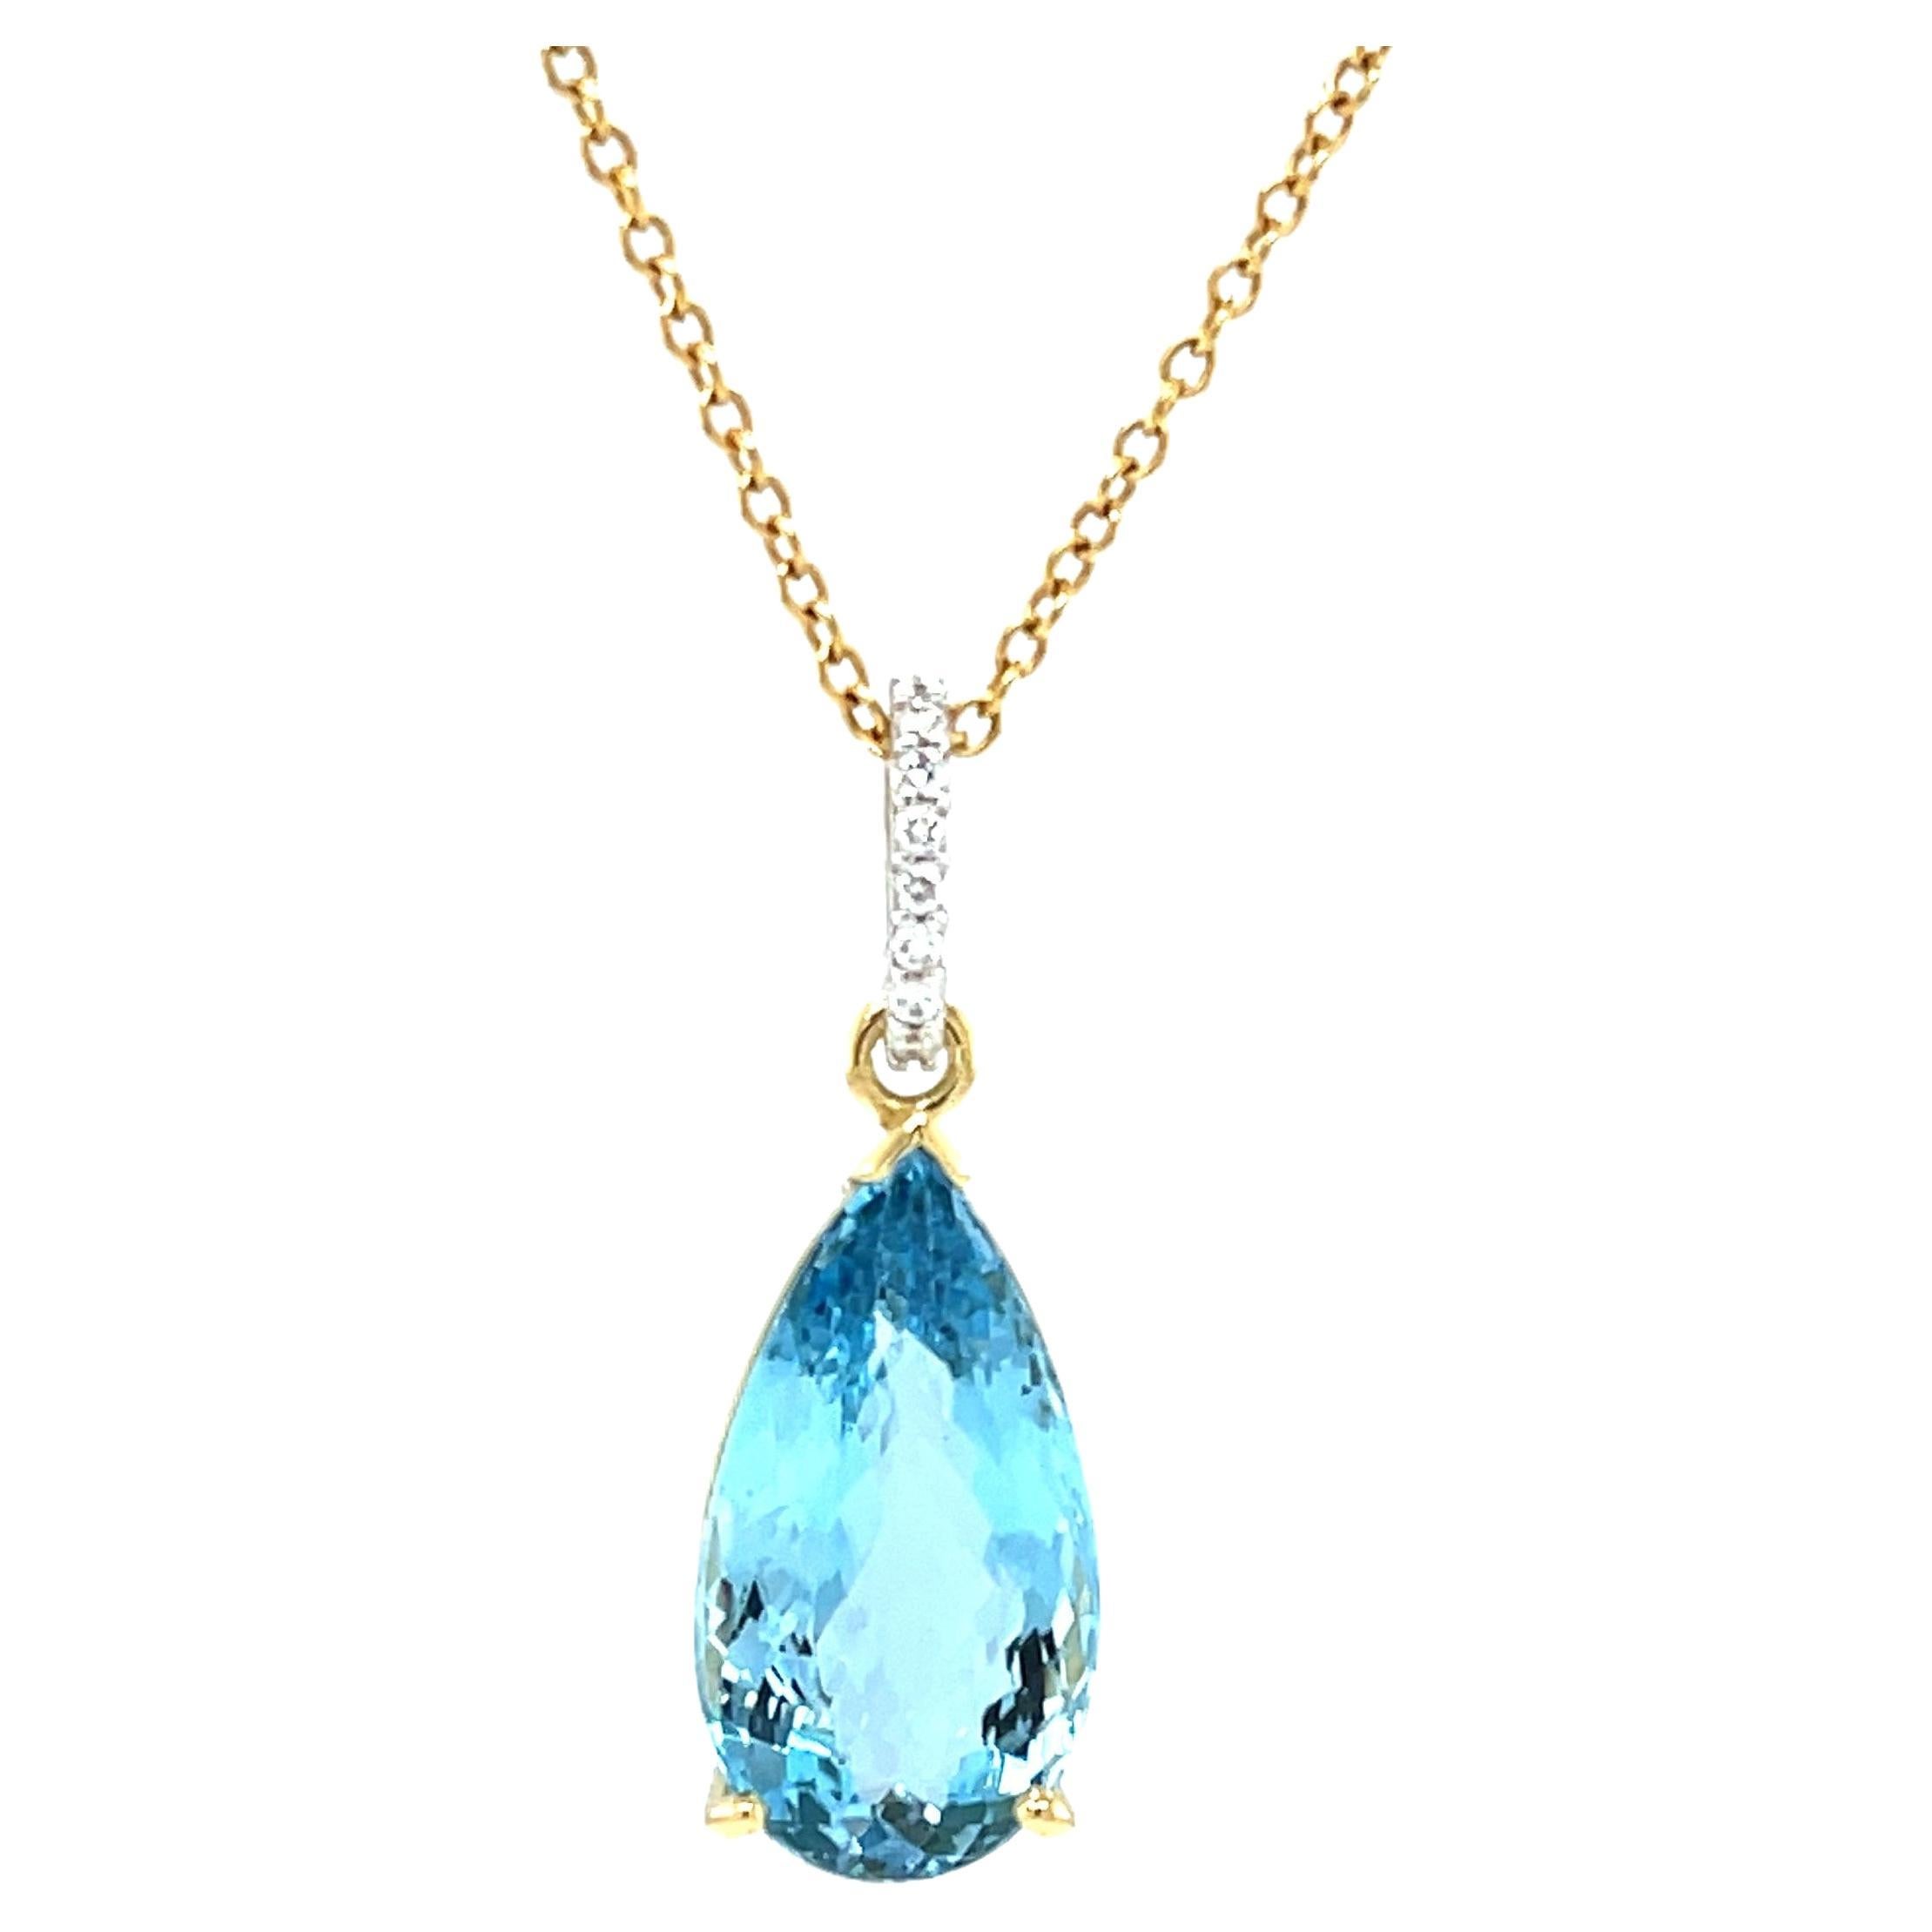 Aquamarine and Diamond Pendant, 8.28 Carats in 18k Yellow and White Gold